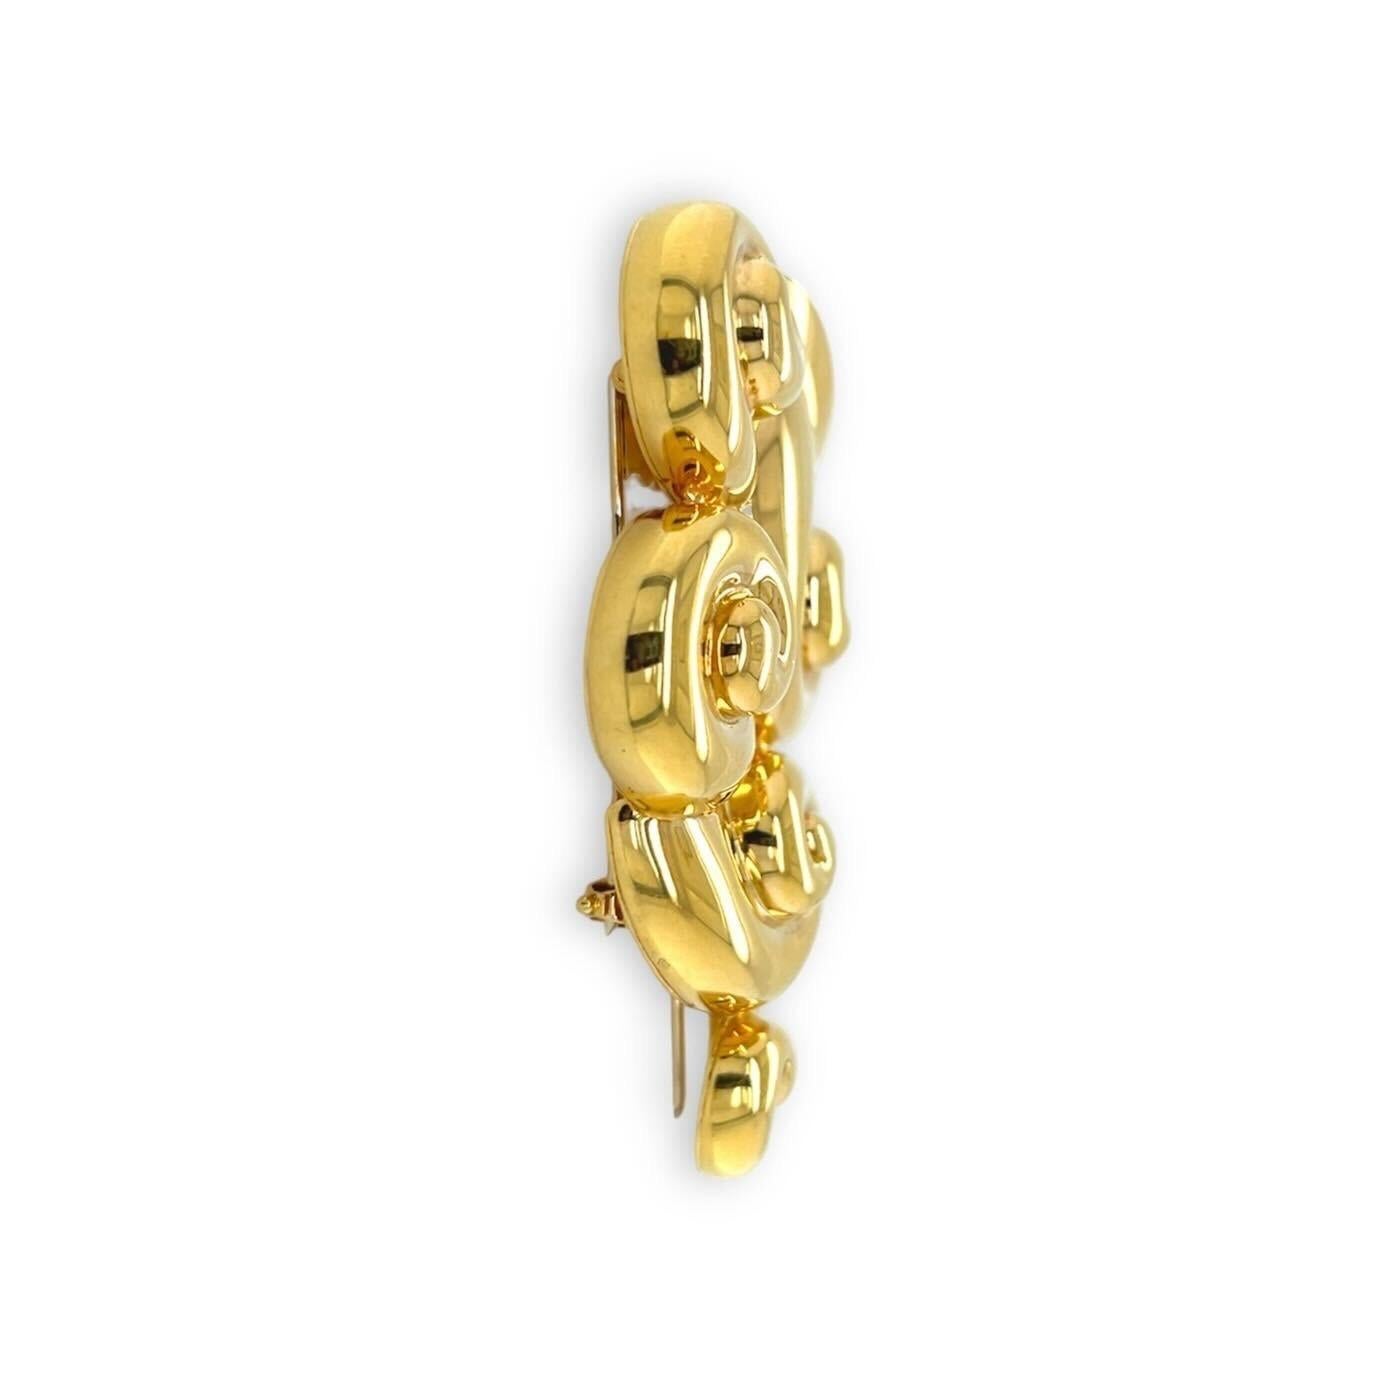 An 18 karat yellow gold brooch, Suzanne Belperron, France.  The “Cloud” brooch designed as five (5) descending fluted scrolls.  Length approximately 3 inches.  Gross weight approximately 43.60 grams.  Signed St. N. Herz Belperron, France and hand